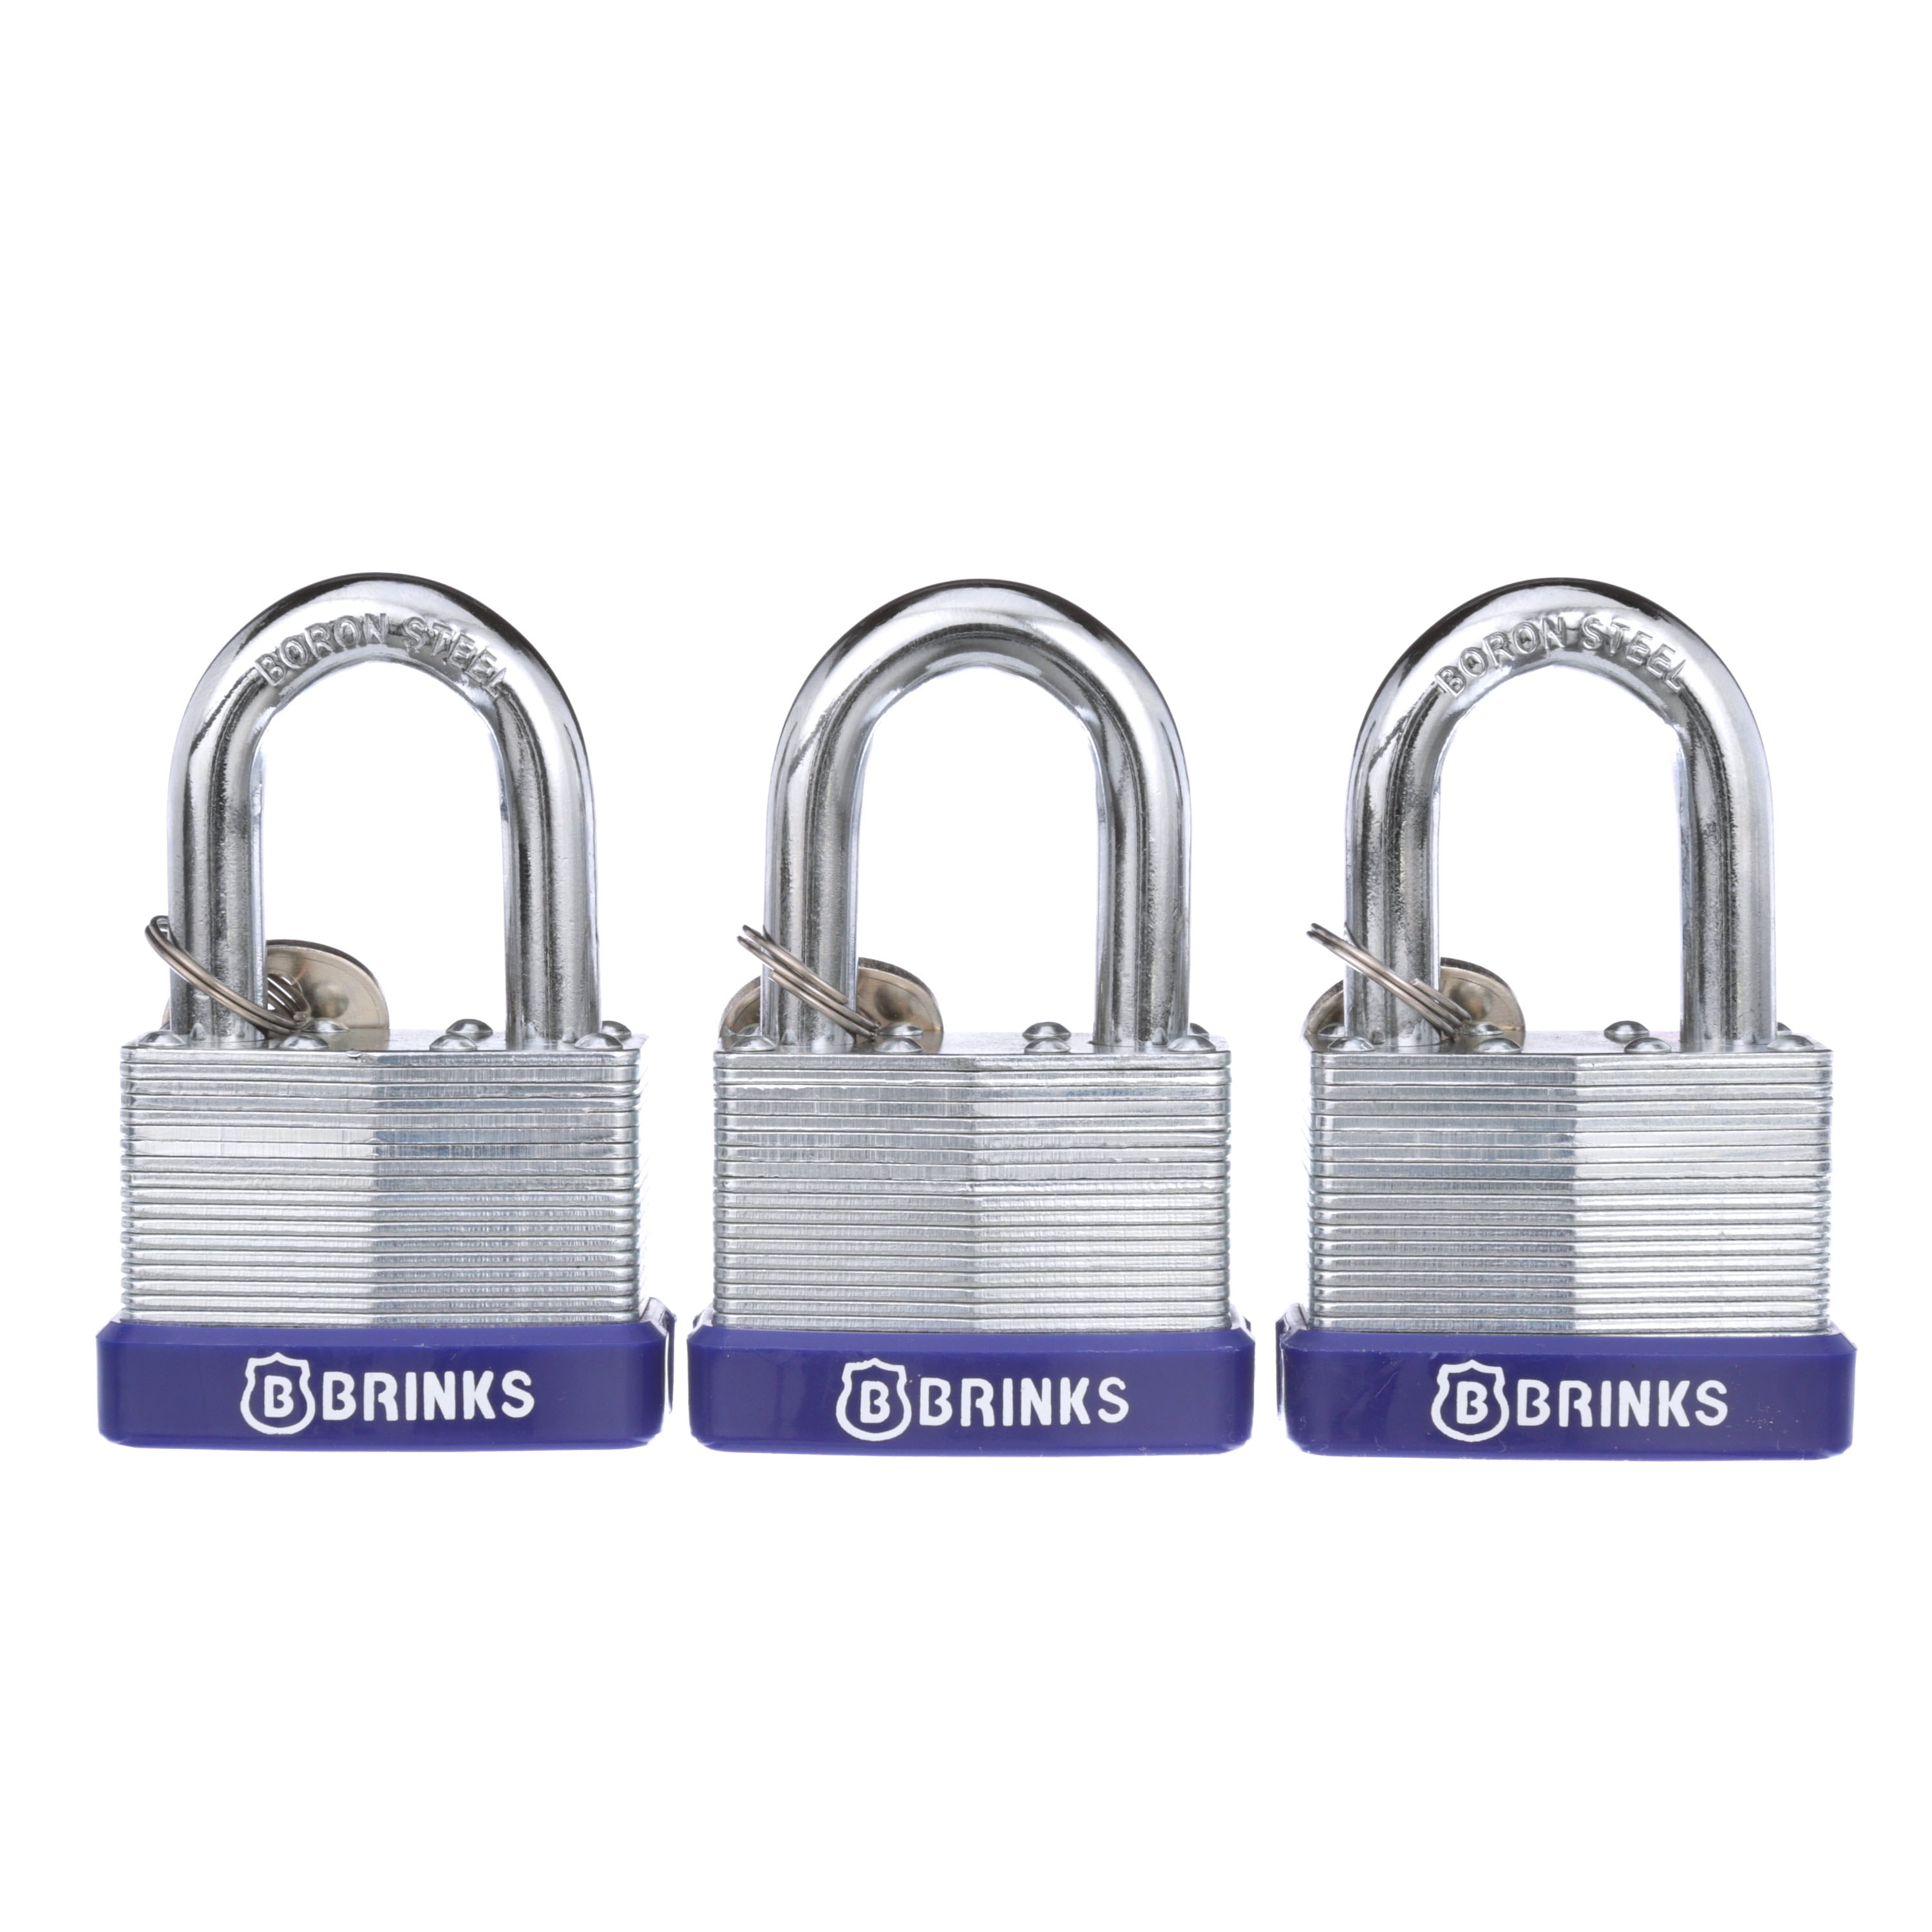 Stainless Steel Discuss Padlock Hardened Stainless High Security Dimple Lock 